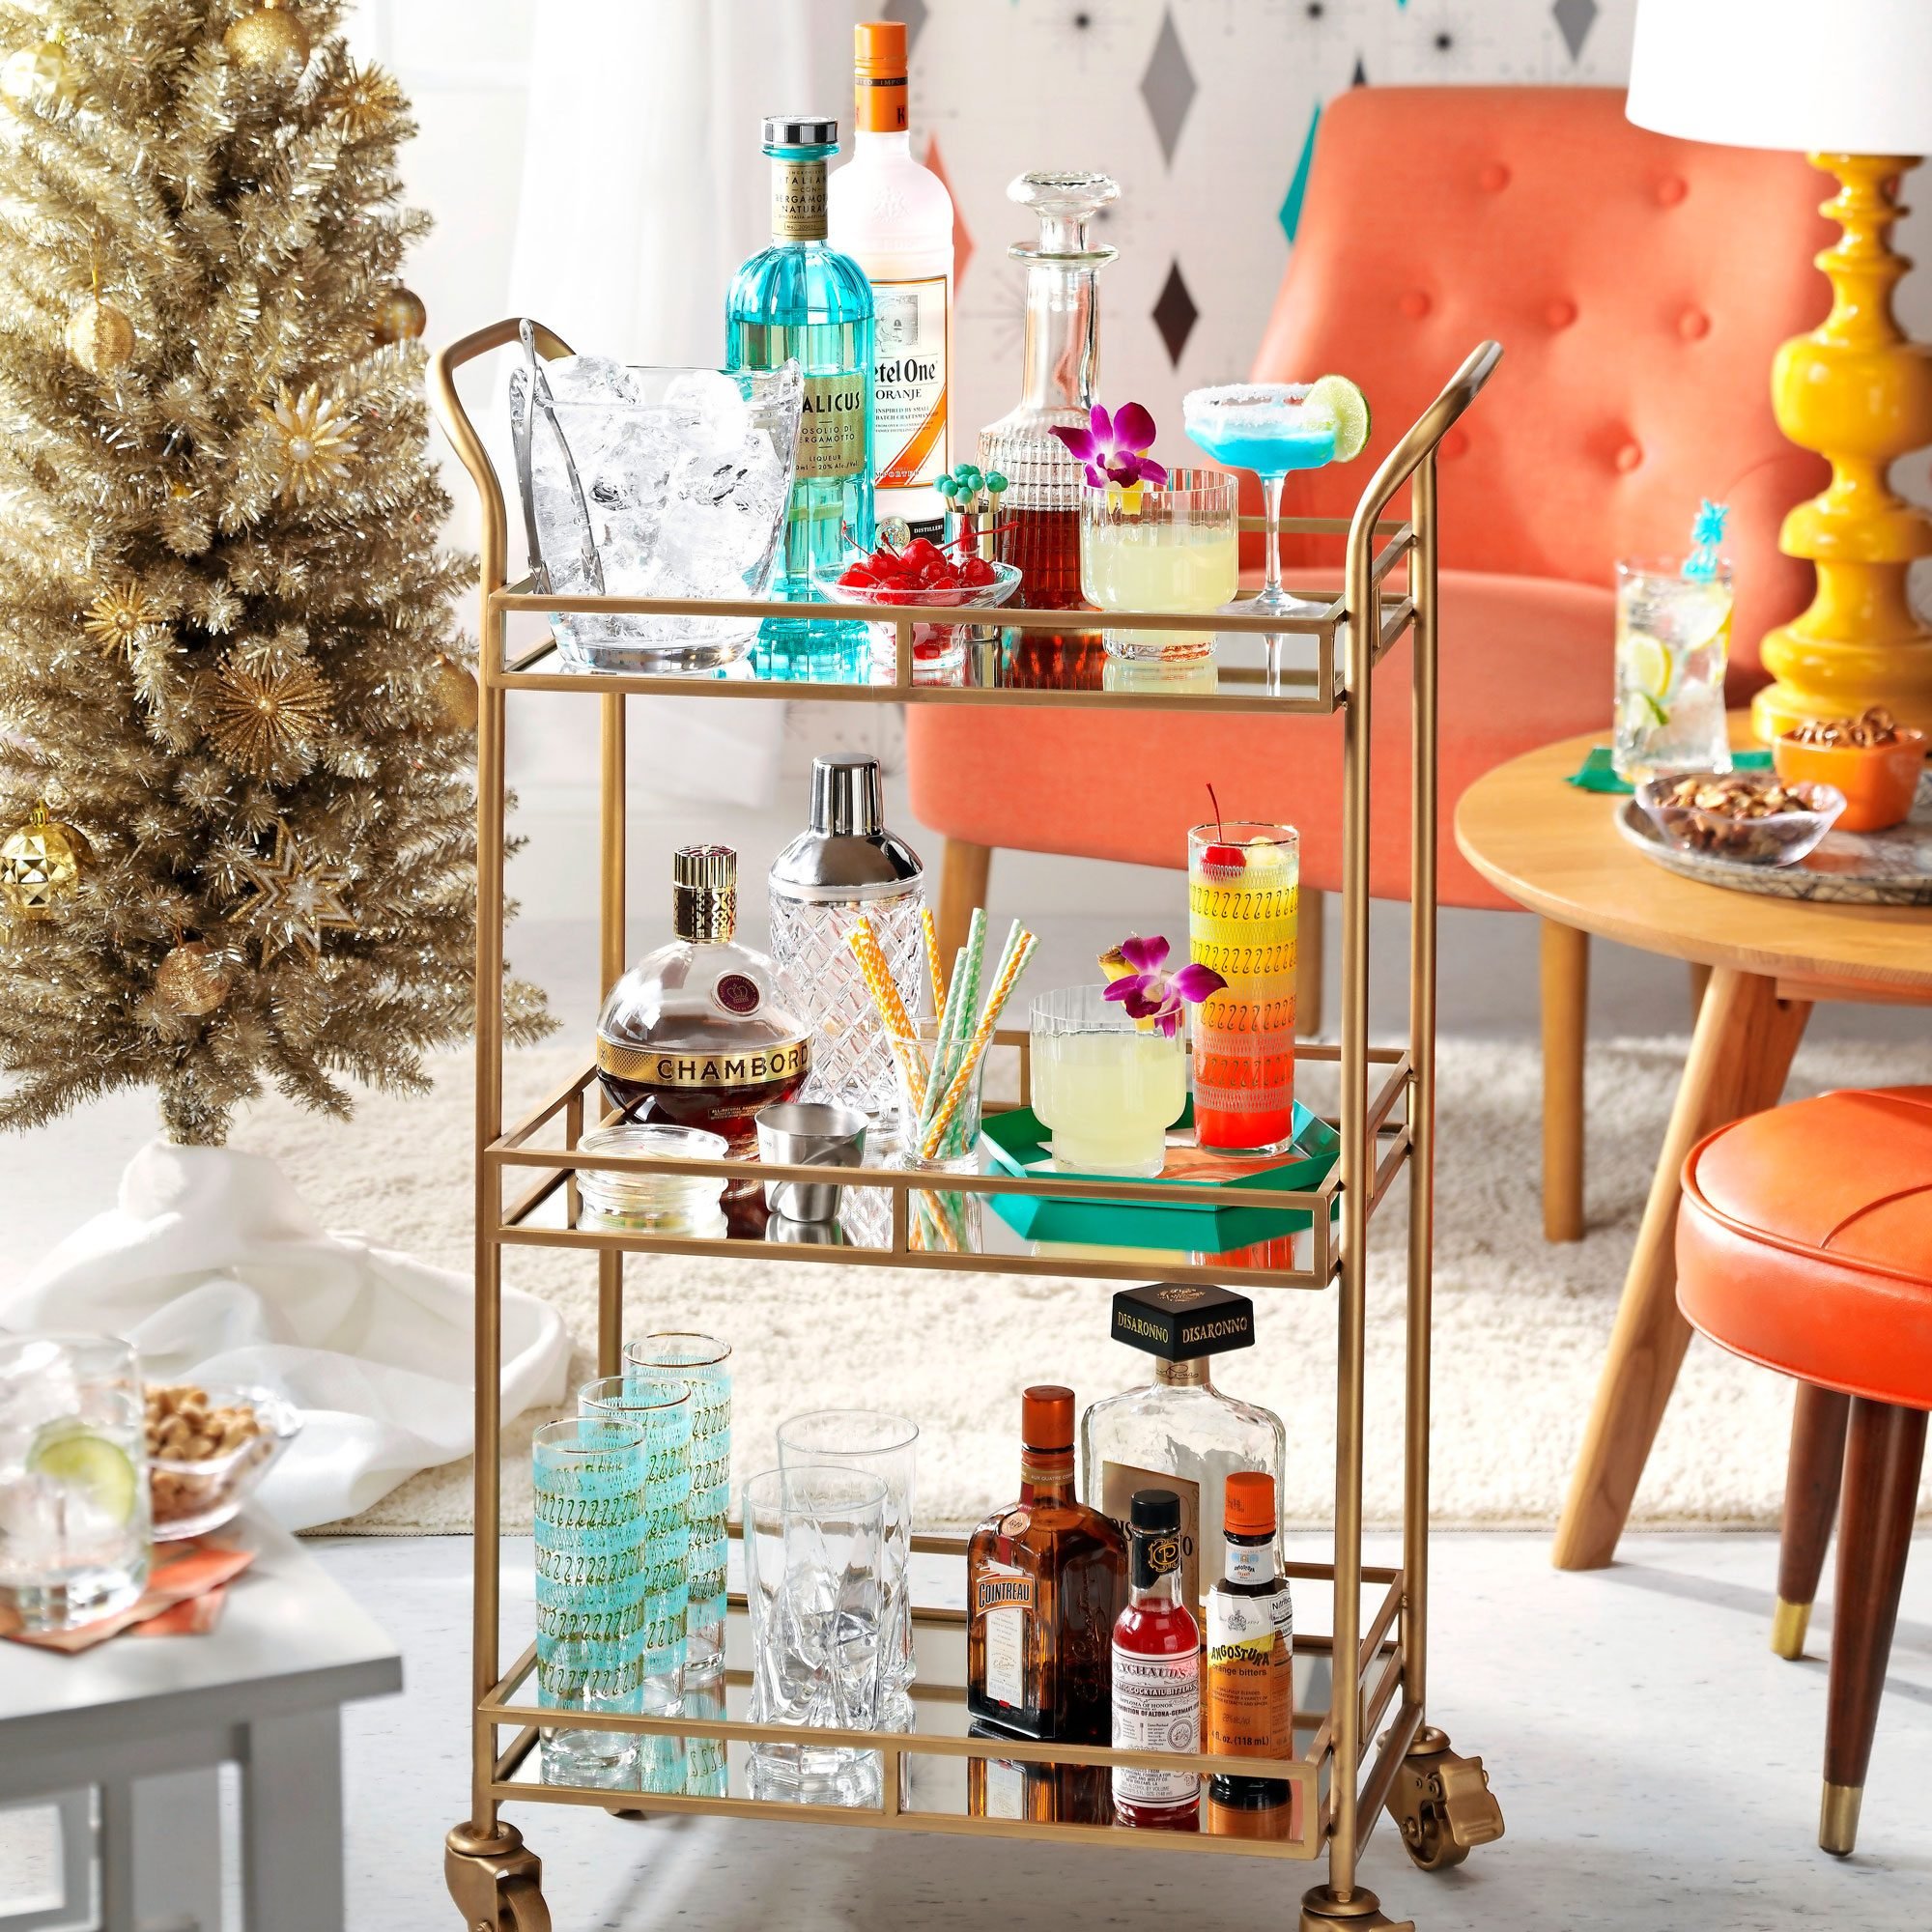 8 Stylish, Useful Bar Cart Ideas for Must-Have Tools and Ingredients